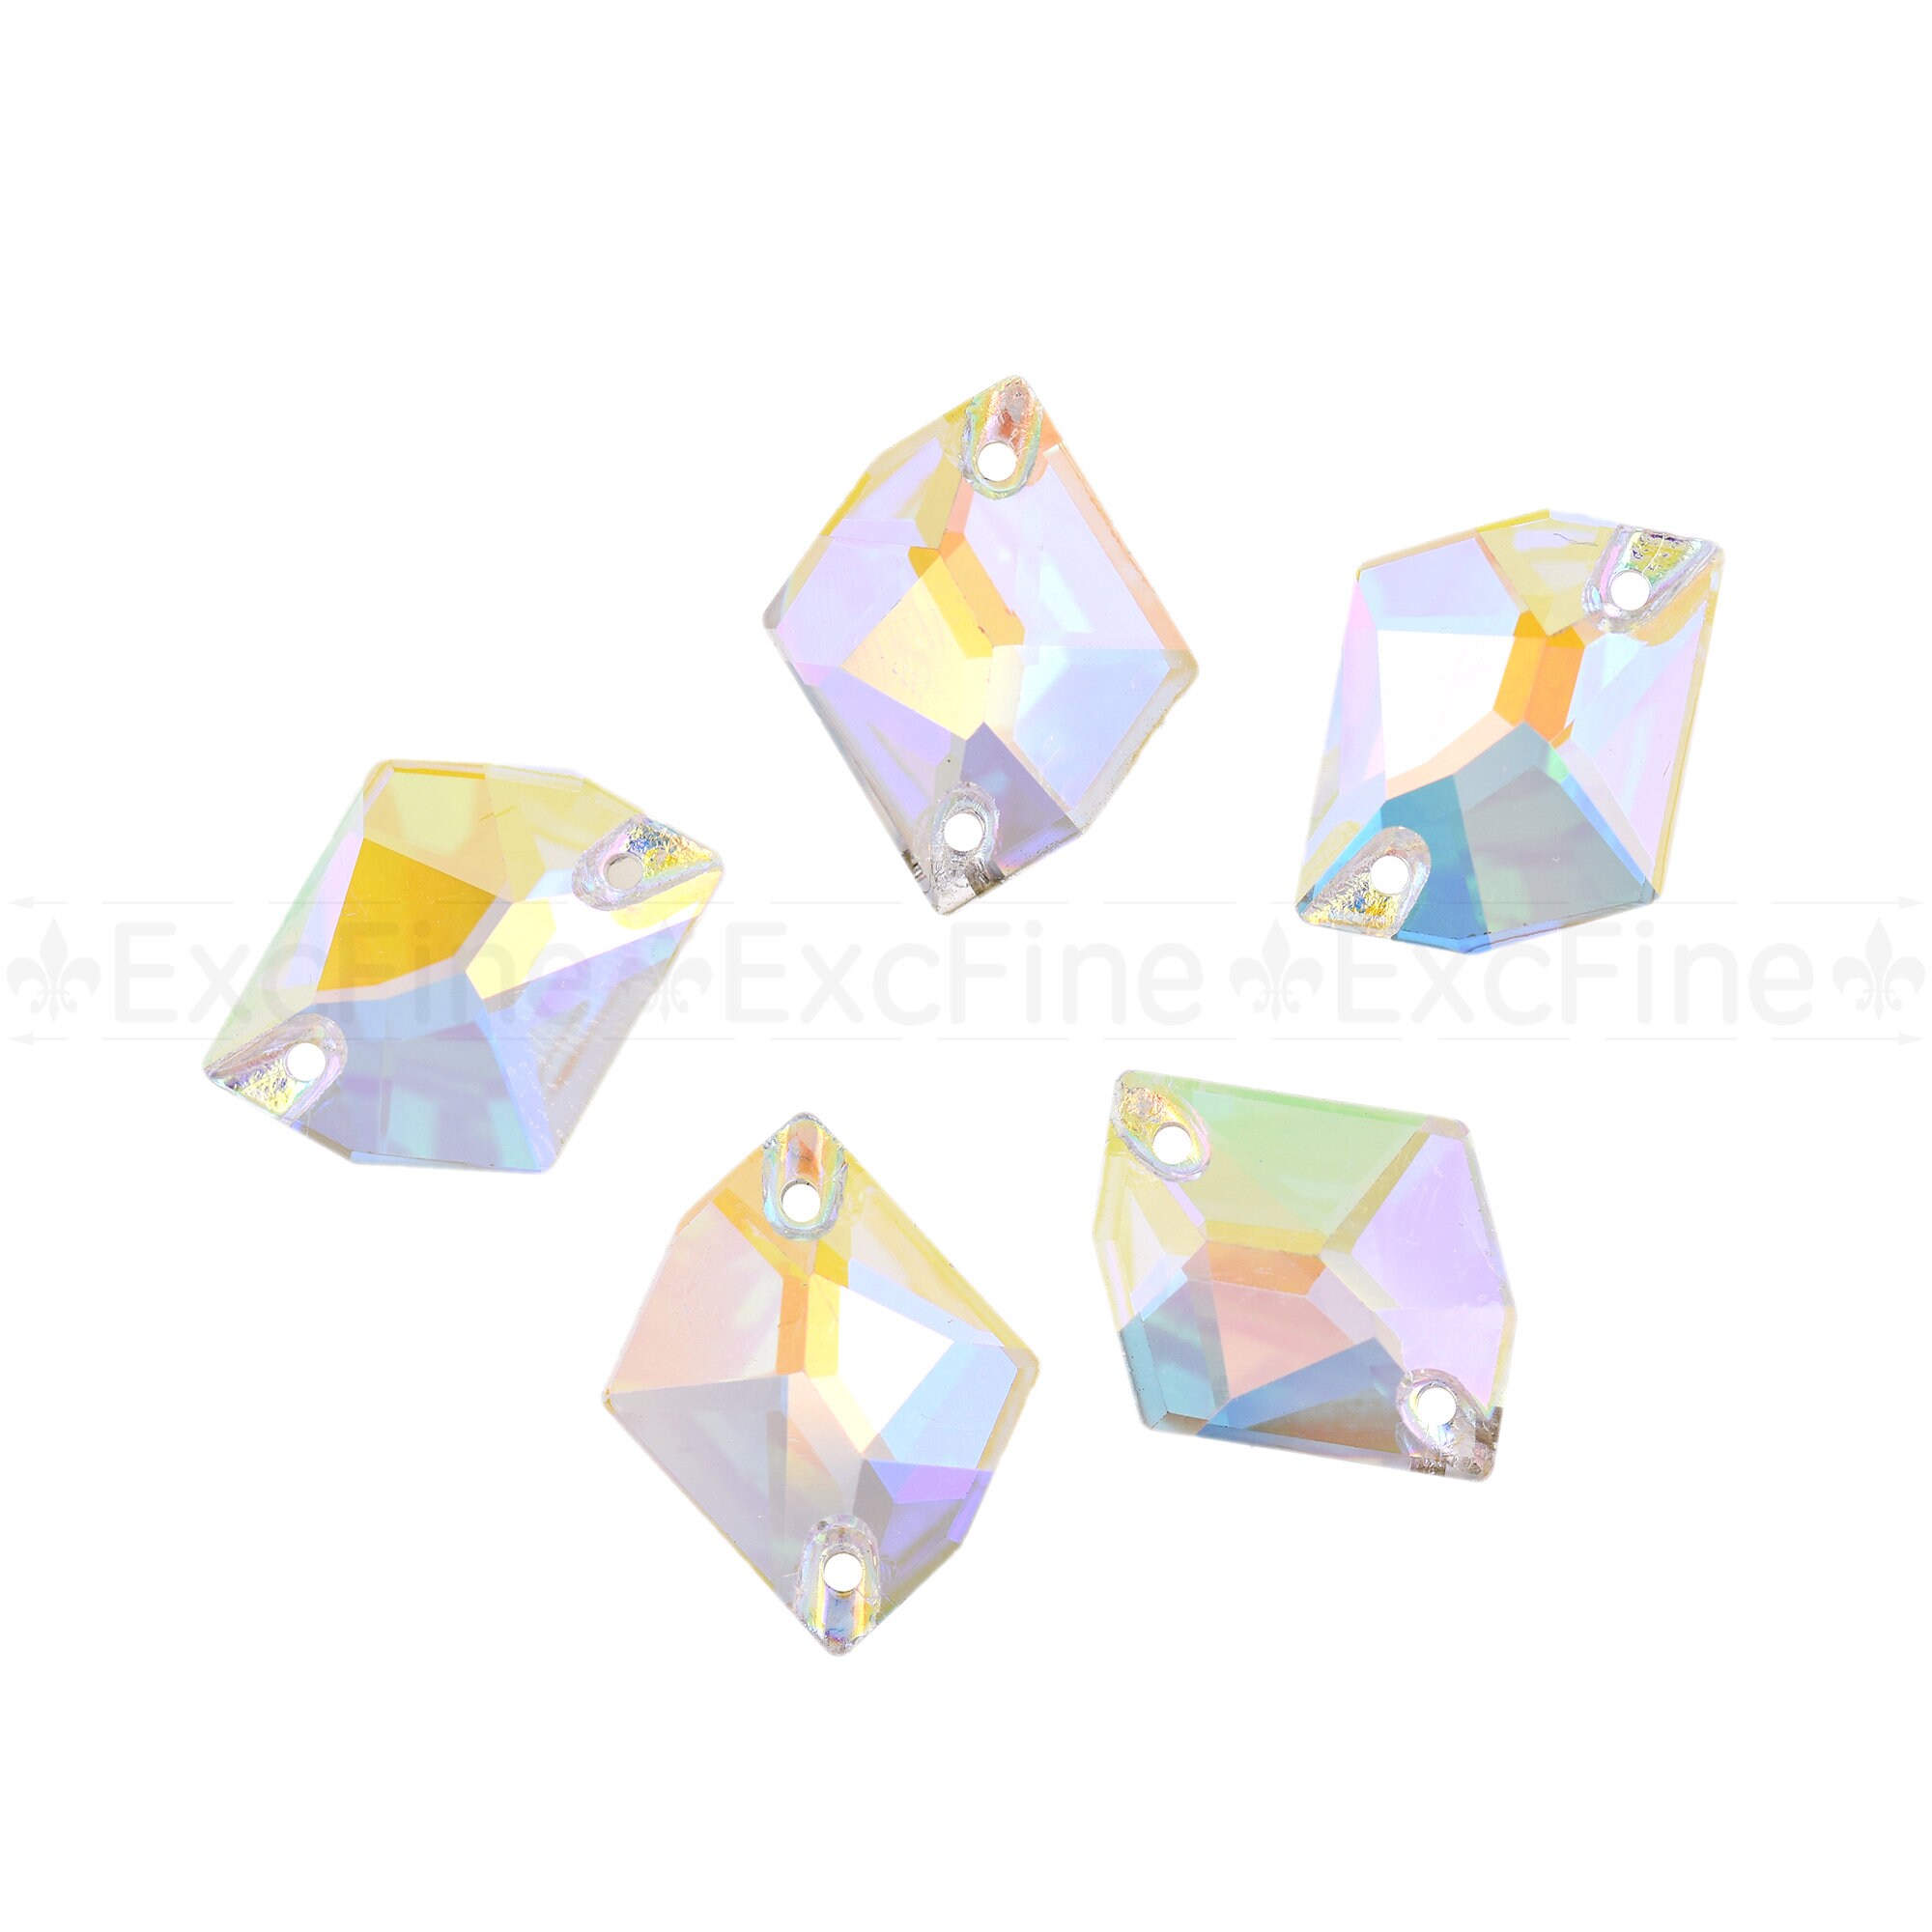 Geometric Flat Back Faceted Crystal,Sew On Glass Gems,DIY Jewelry Making Charm